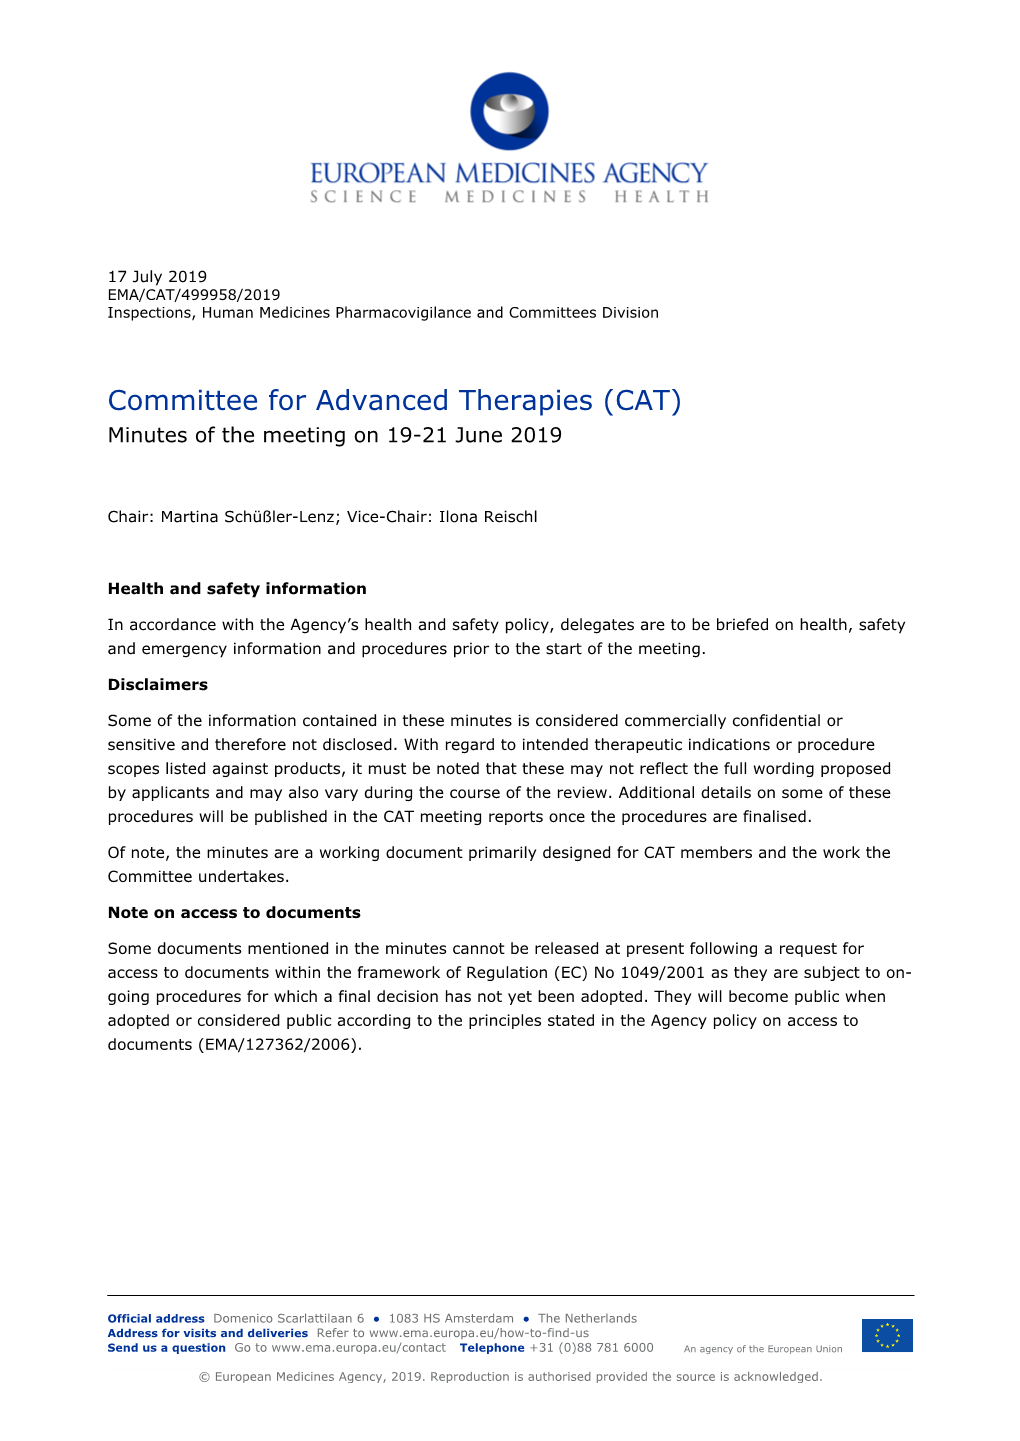 Committee for Advanced Therapies (CAT). Minutes of the Meeting 19